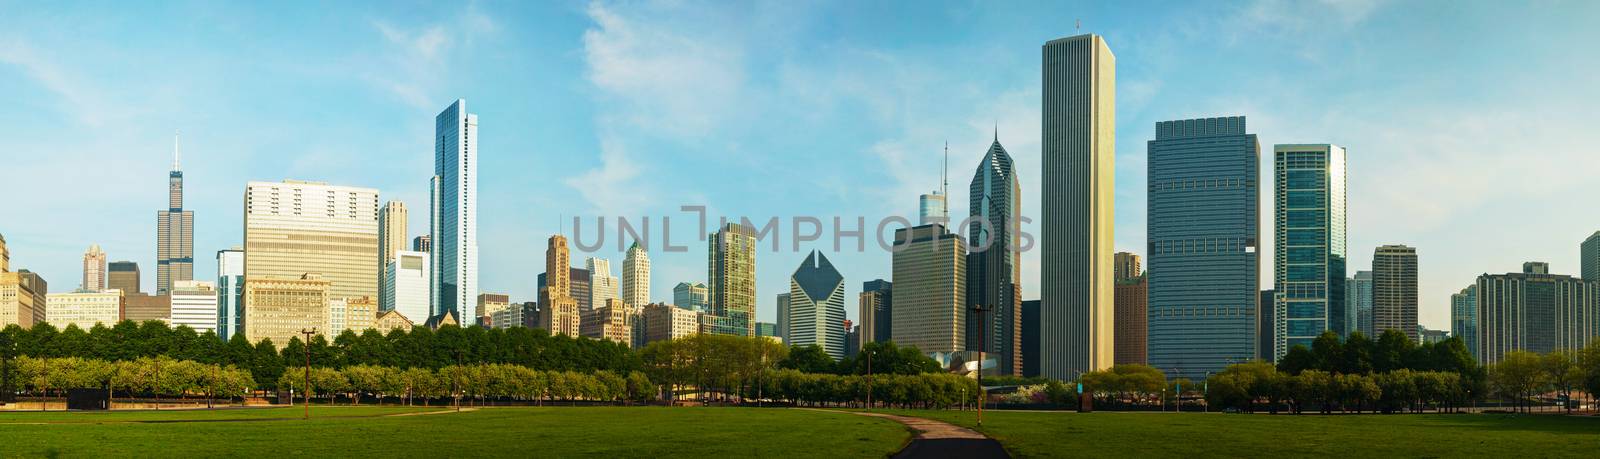 Downtown Chicago as seen from Grant park in the morning